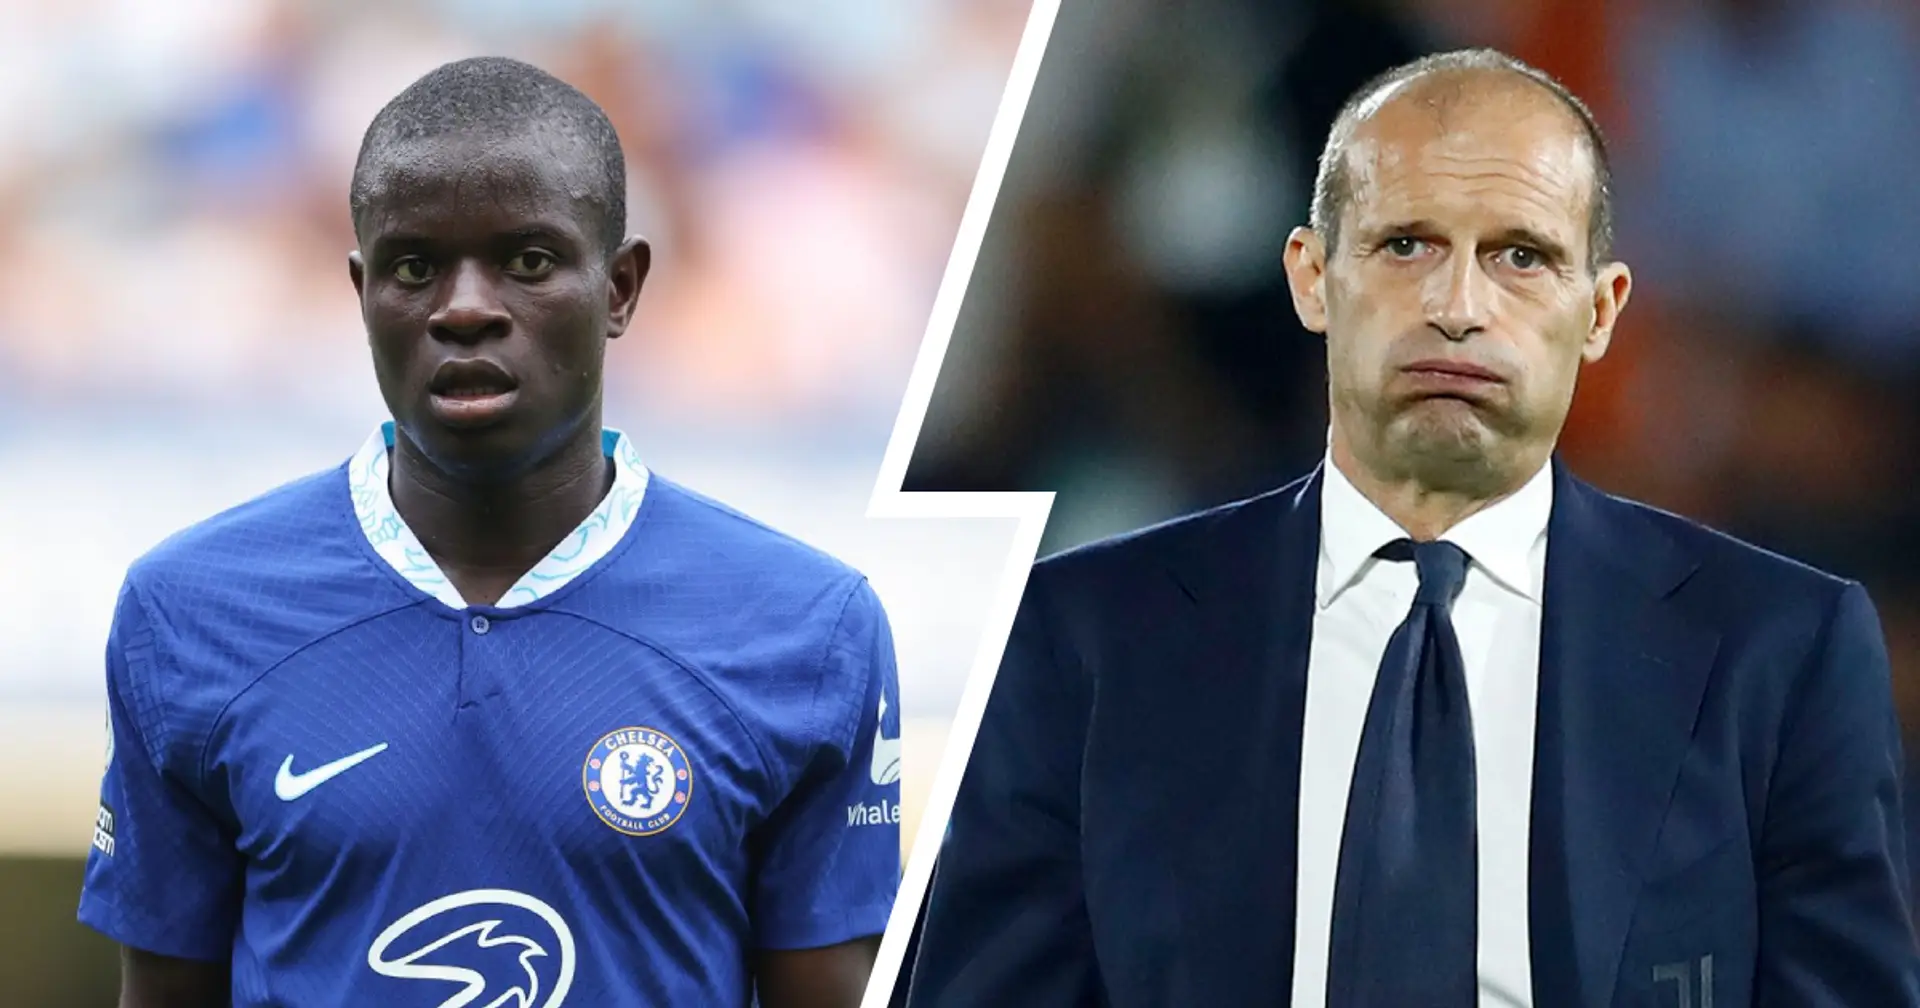 Juventus 'enquired' about Kante last summer (reliability: 5 stars)